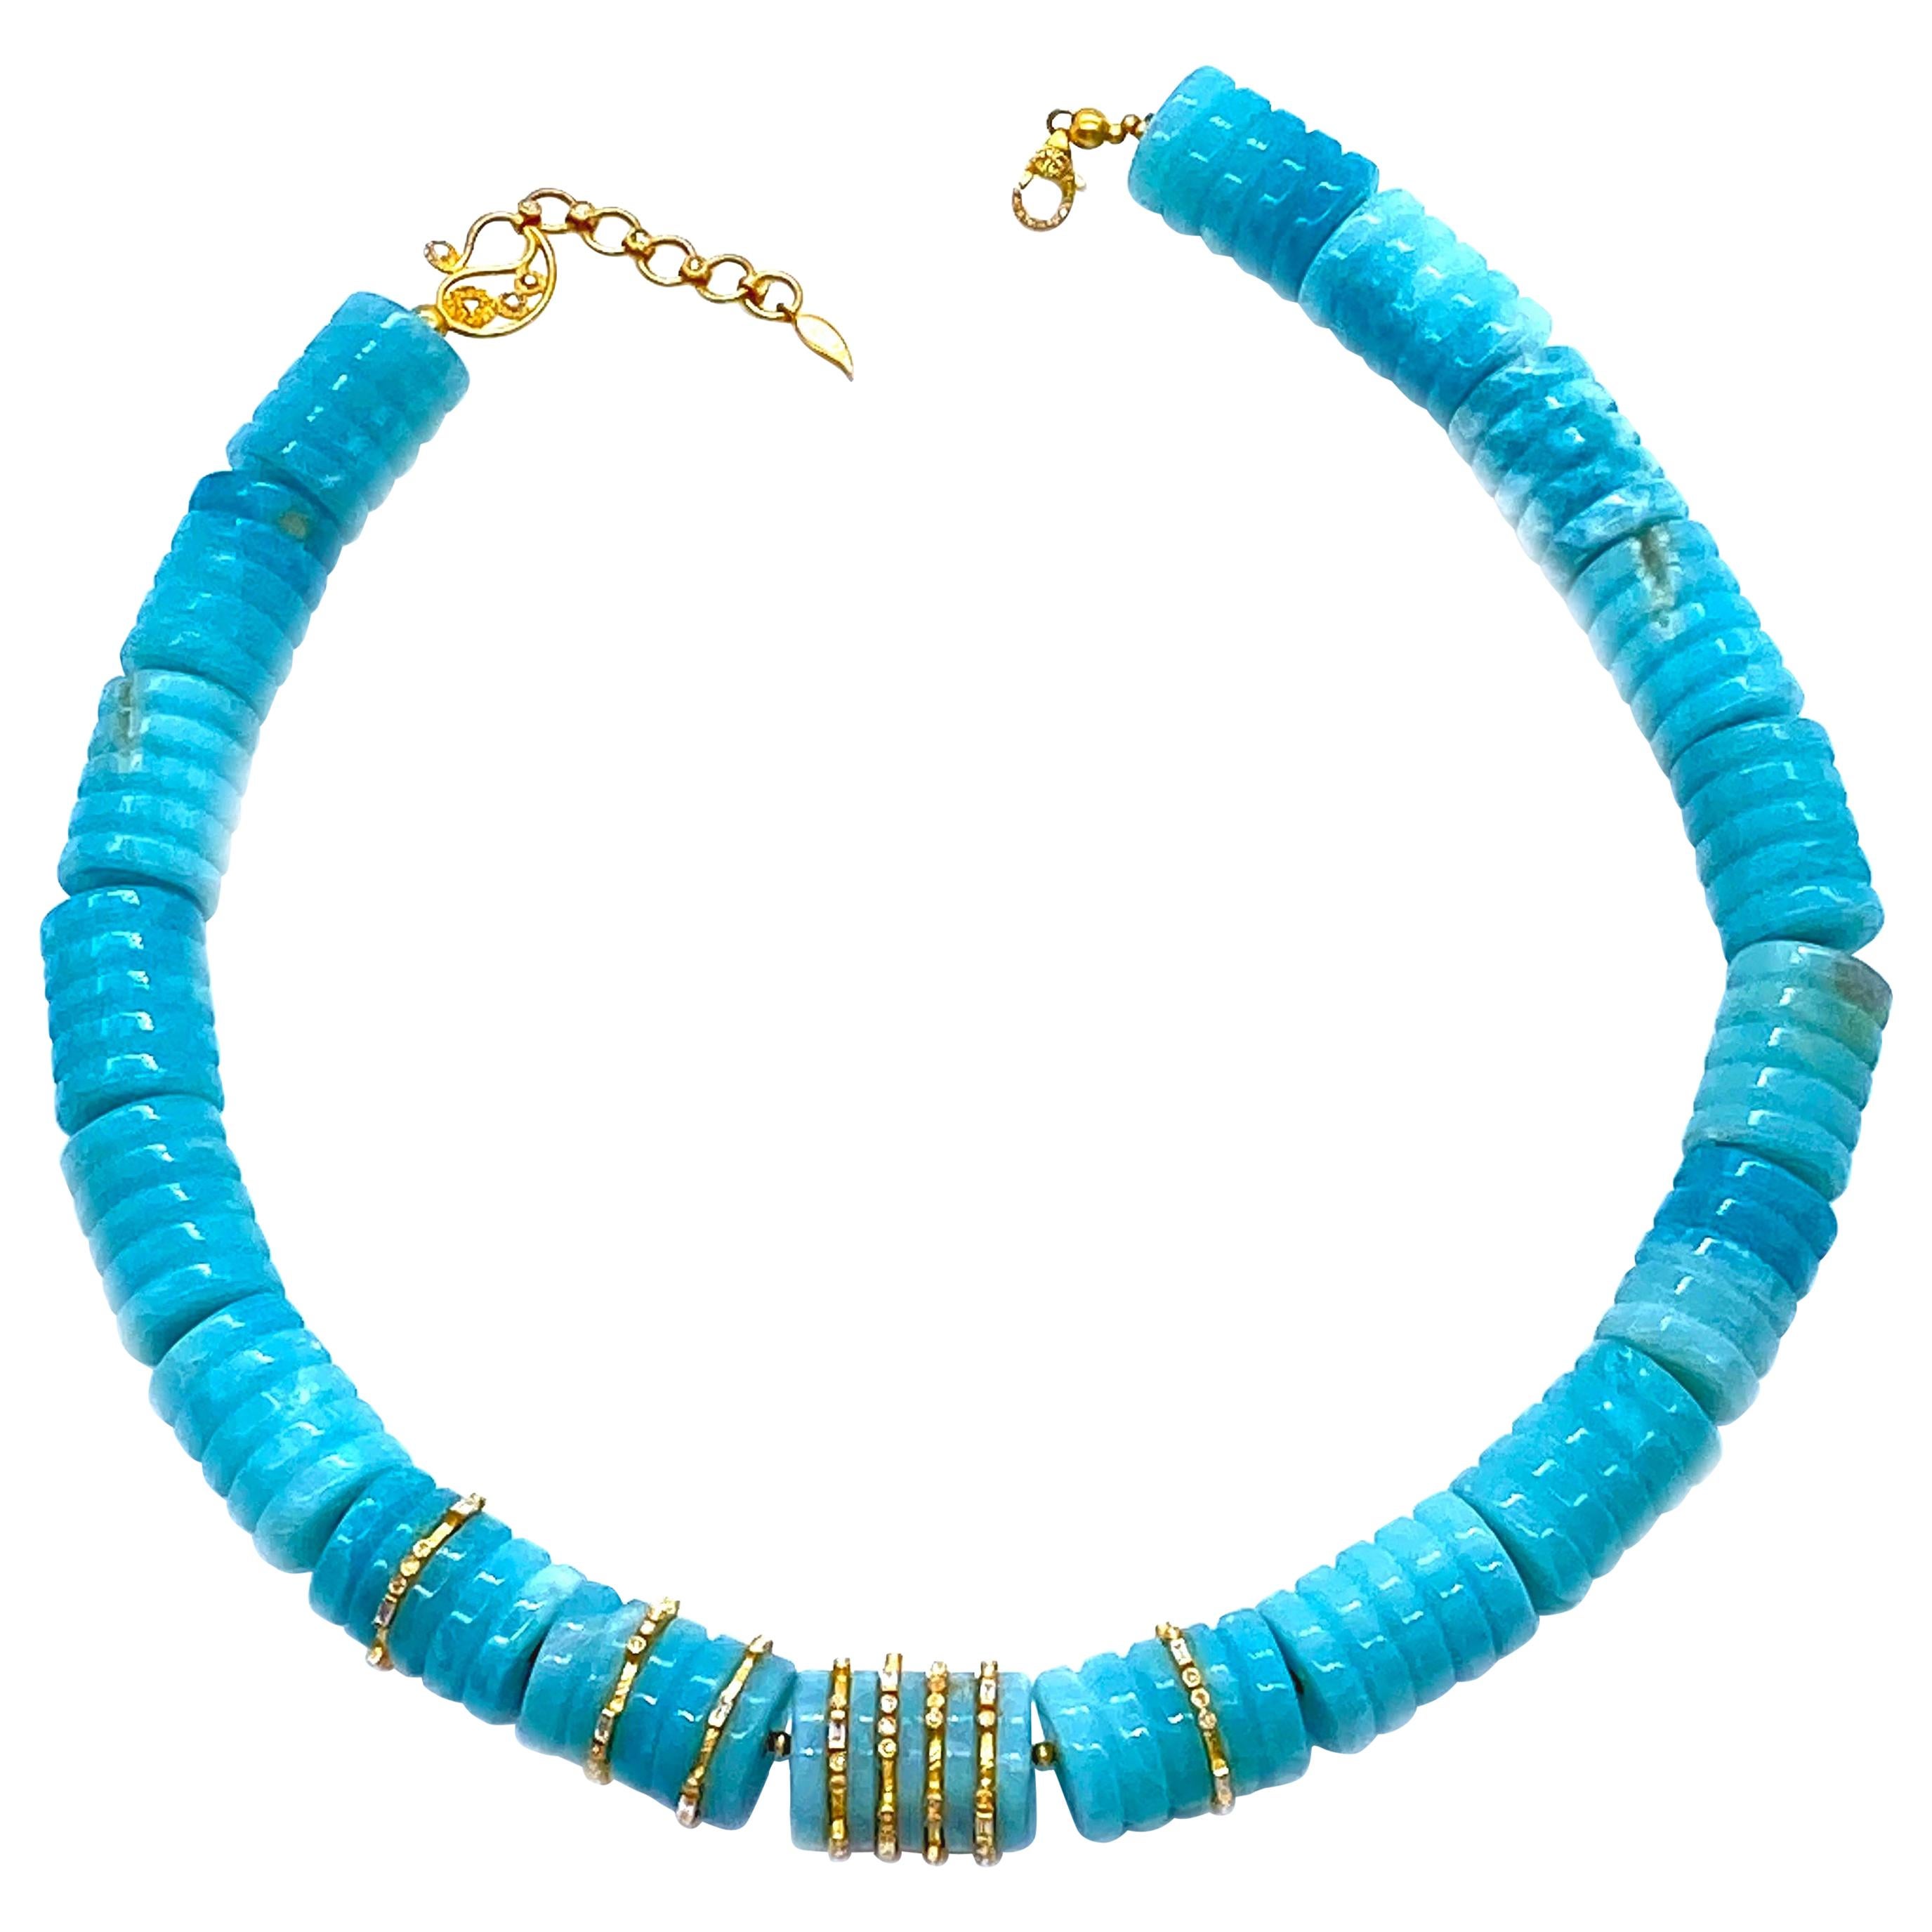 Classic Handmade Aquamarine Beads Coomi 20 Karat Gold Necklace with Gold Beads For Sale